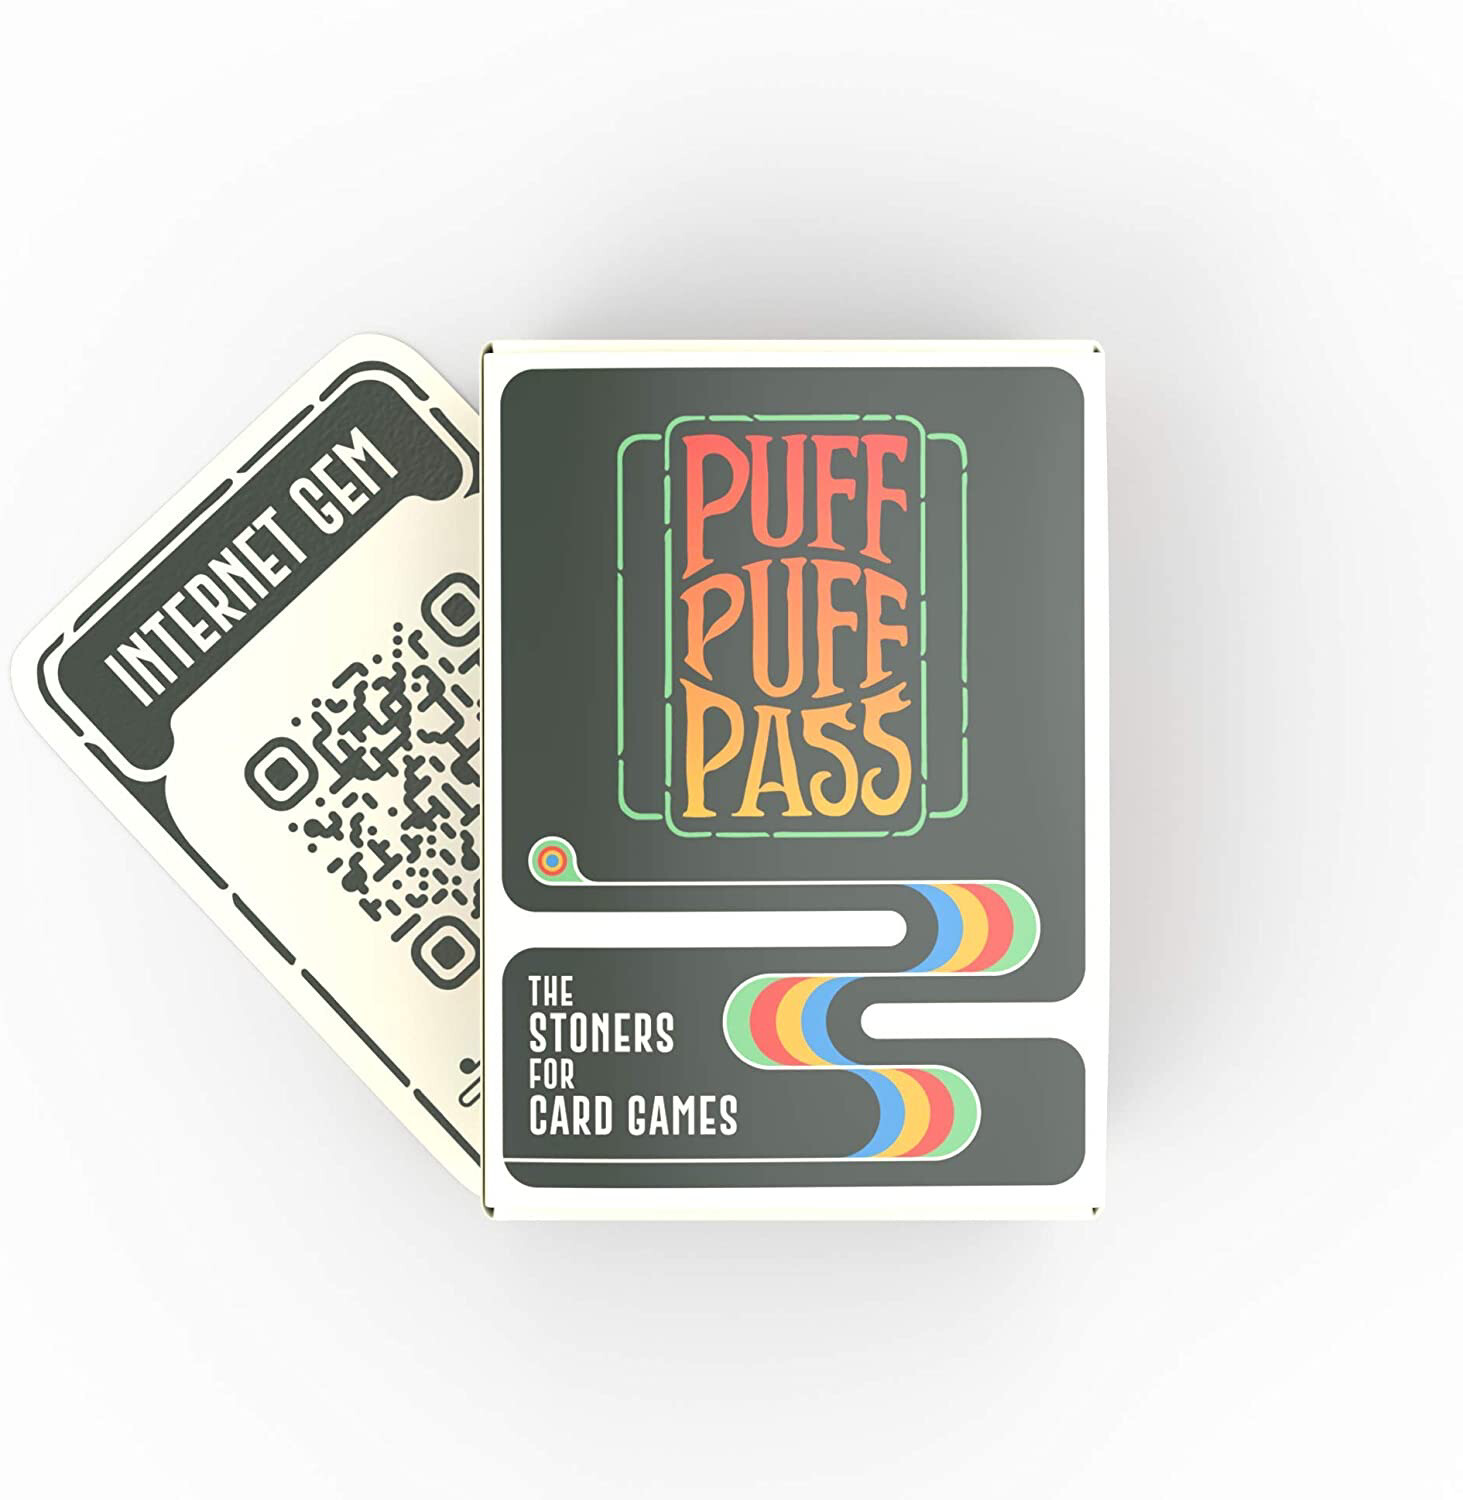 Puff Puff Pass - The Stoners For Card Games